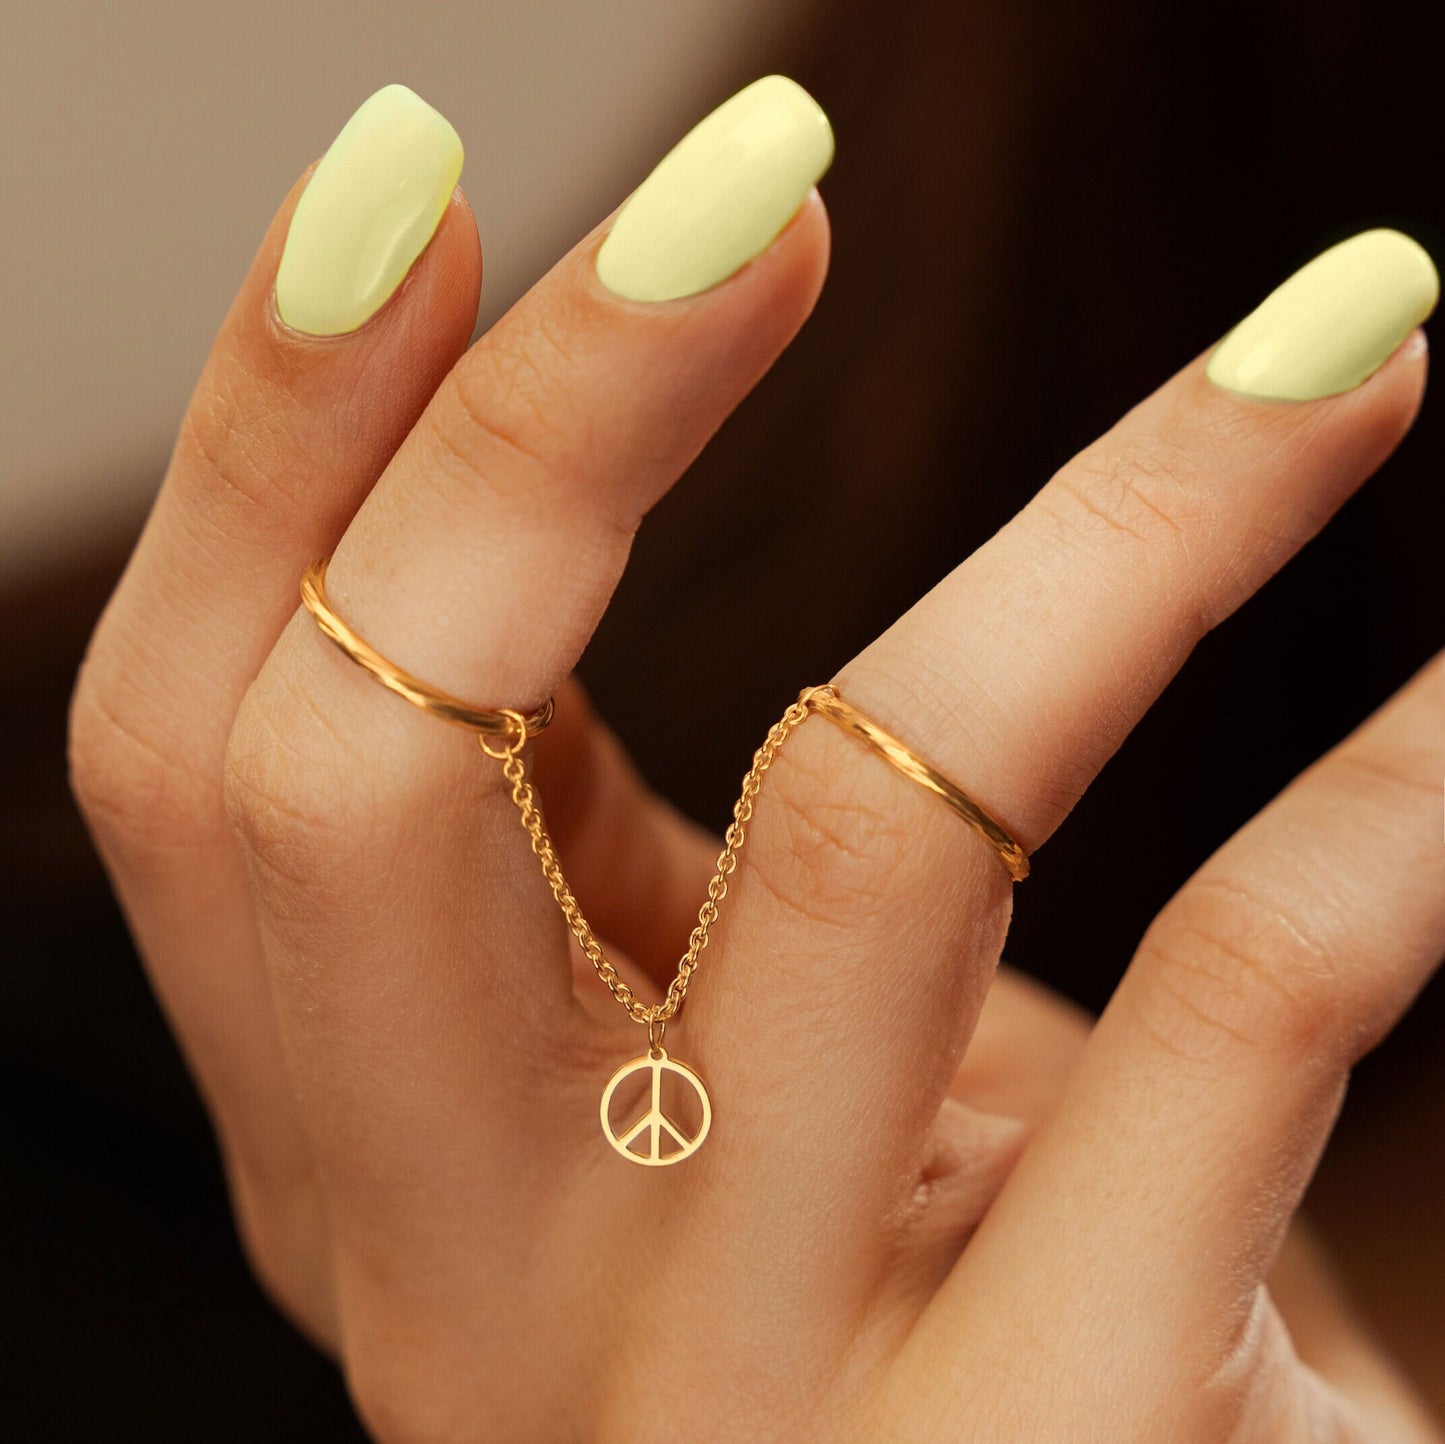 Dainty Diamond-Cut Stacking Rings With Chain and Peace Symbol Charm